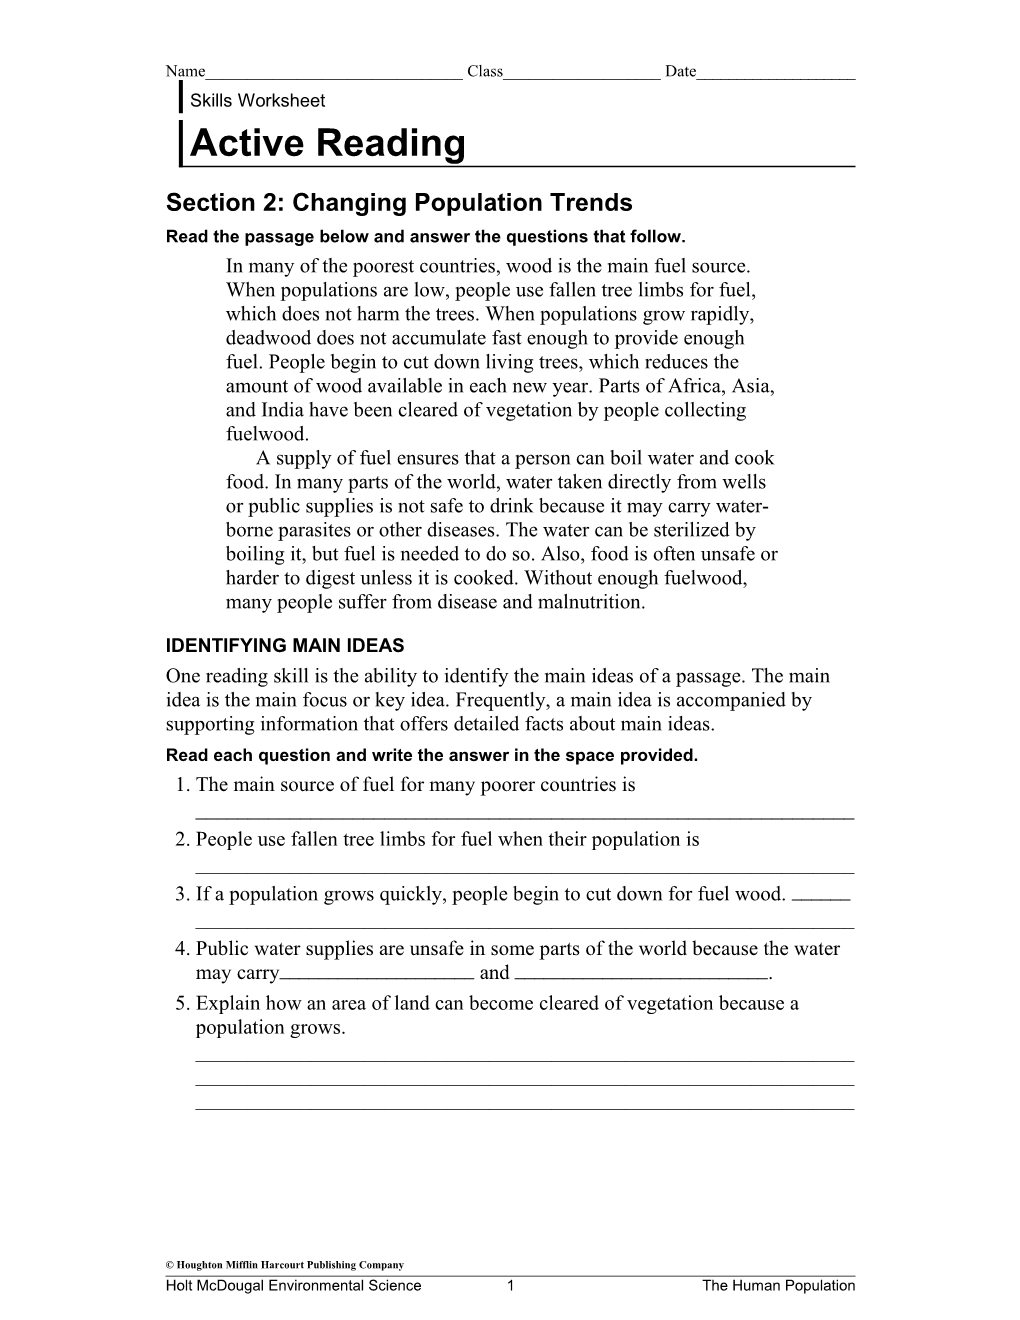 Section 2: Changing Population Trends